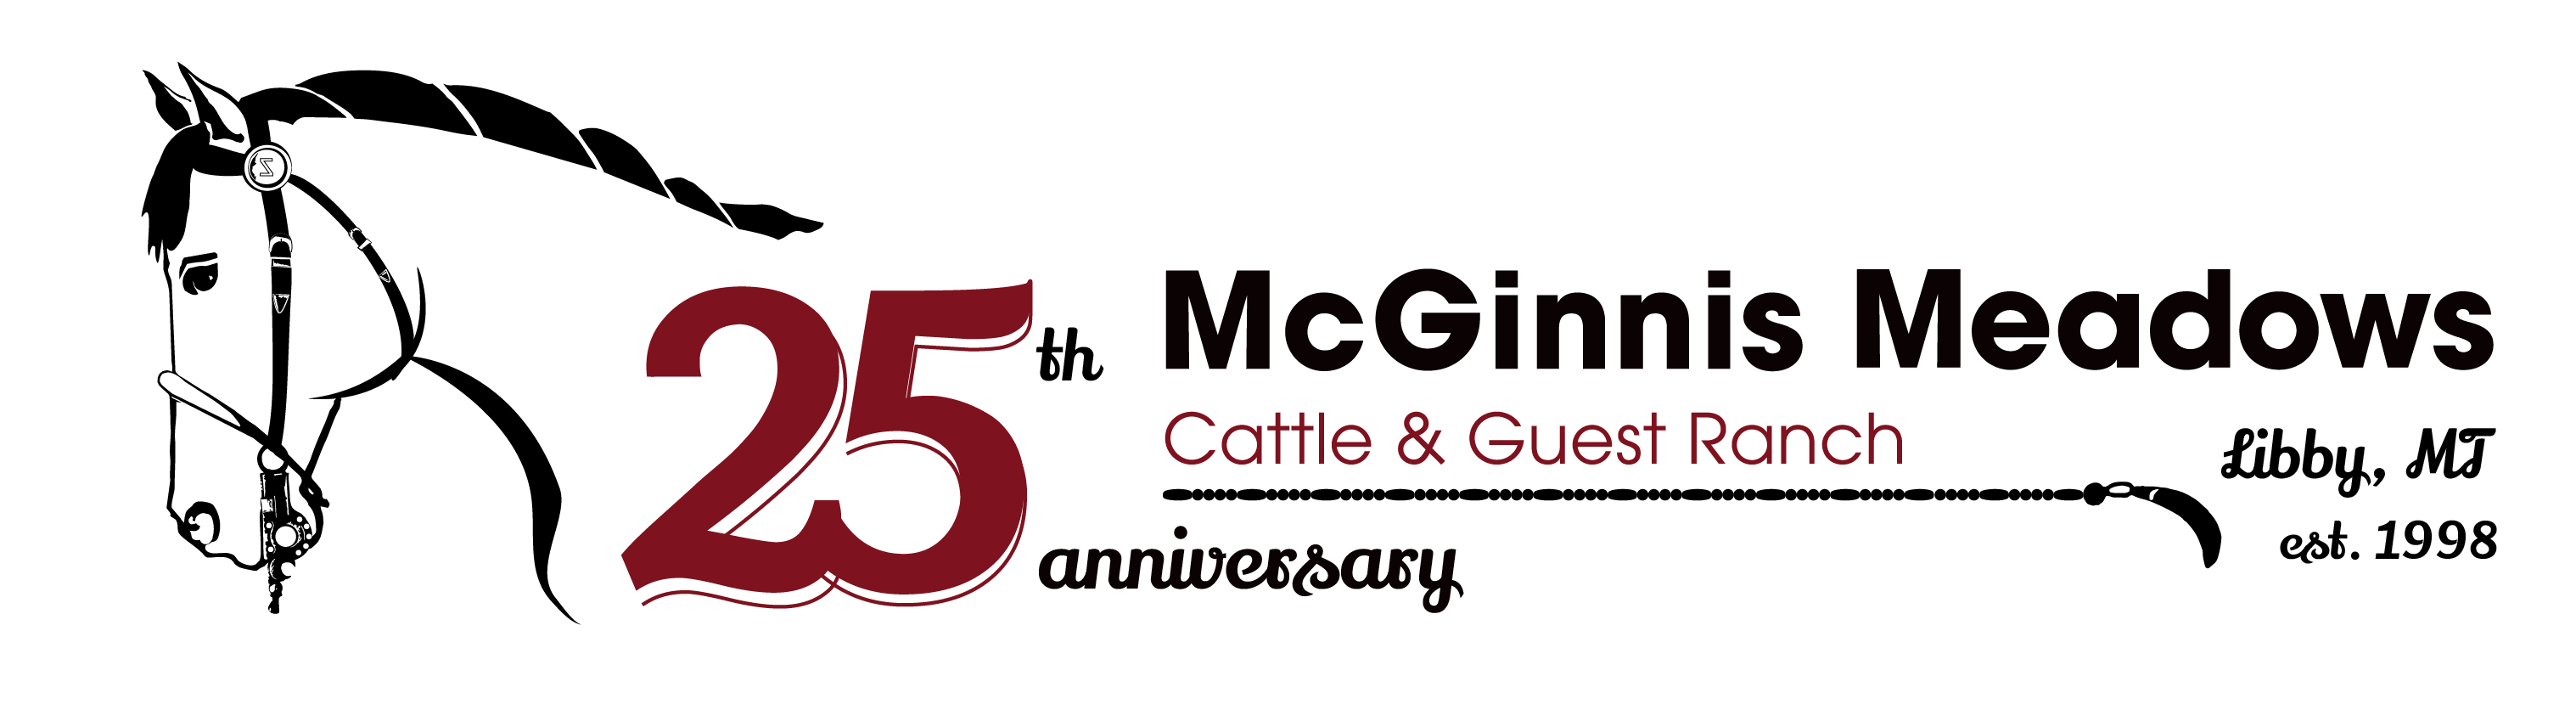 Montana Working Cattle Ranch - McGinnis Meadows Cattle & Guest Ranch in Northwest Montana